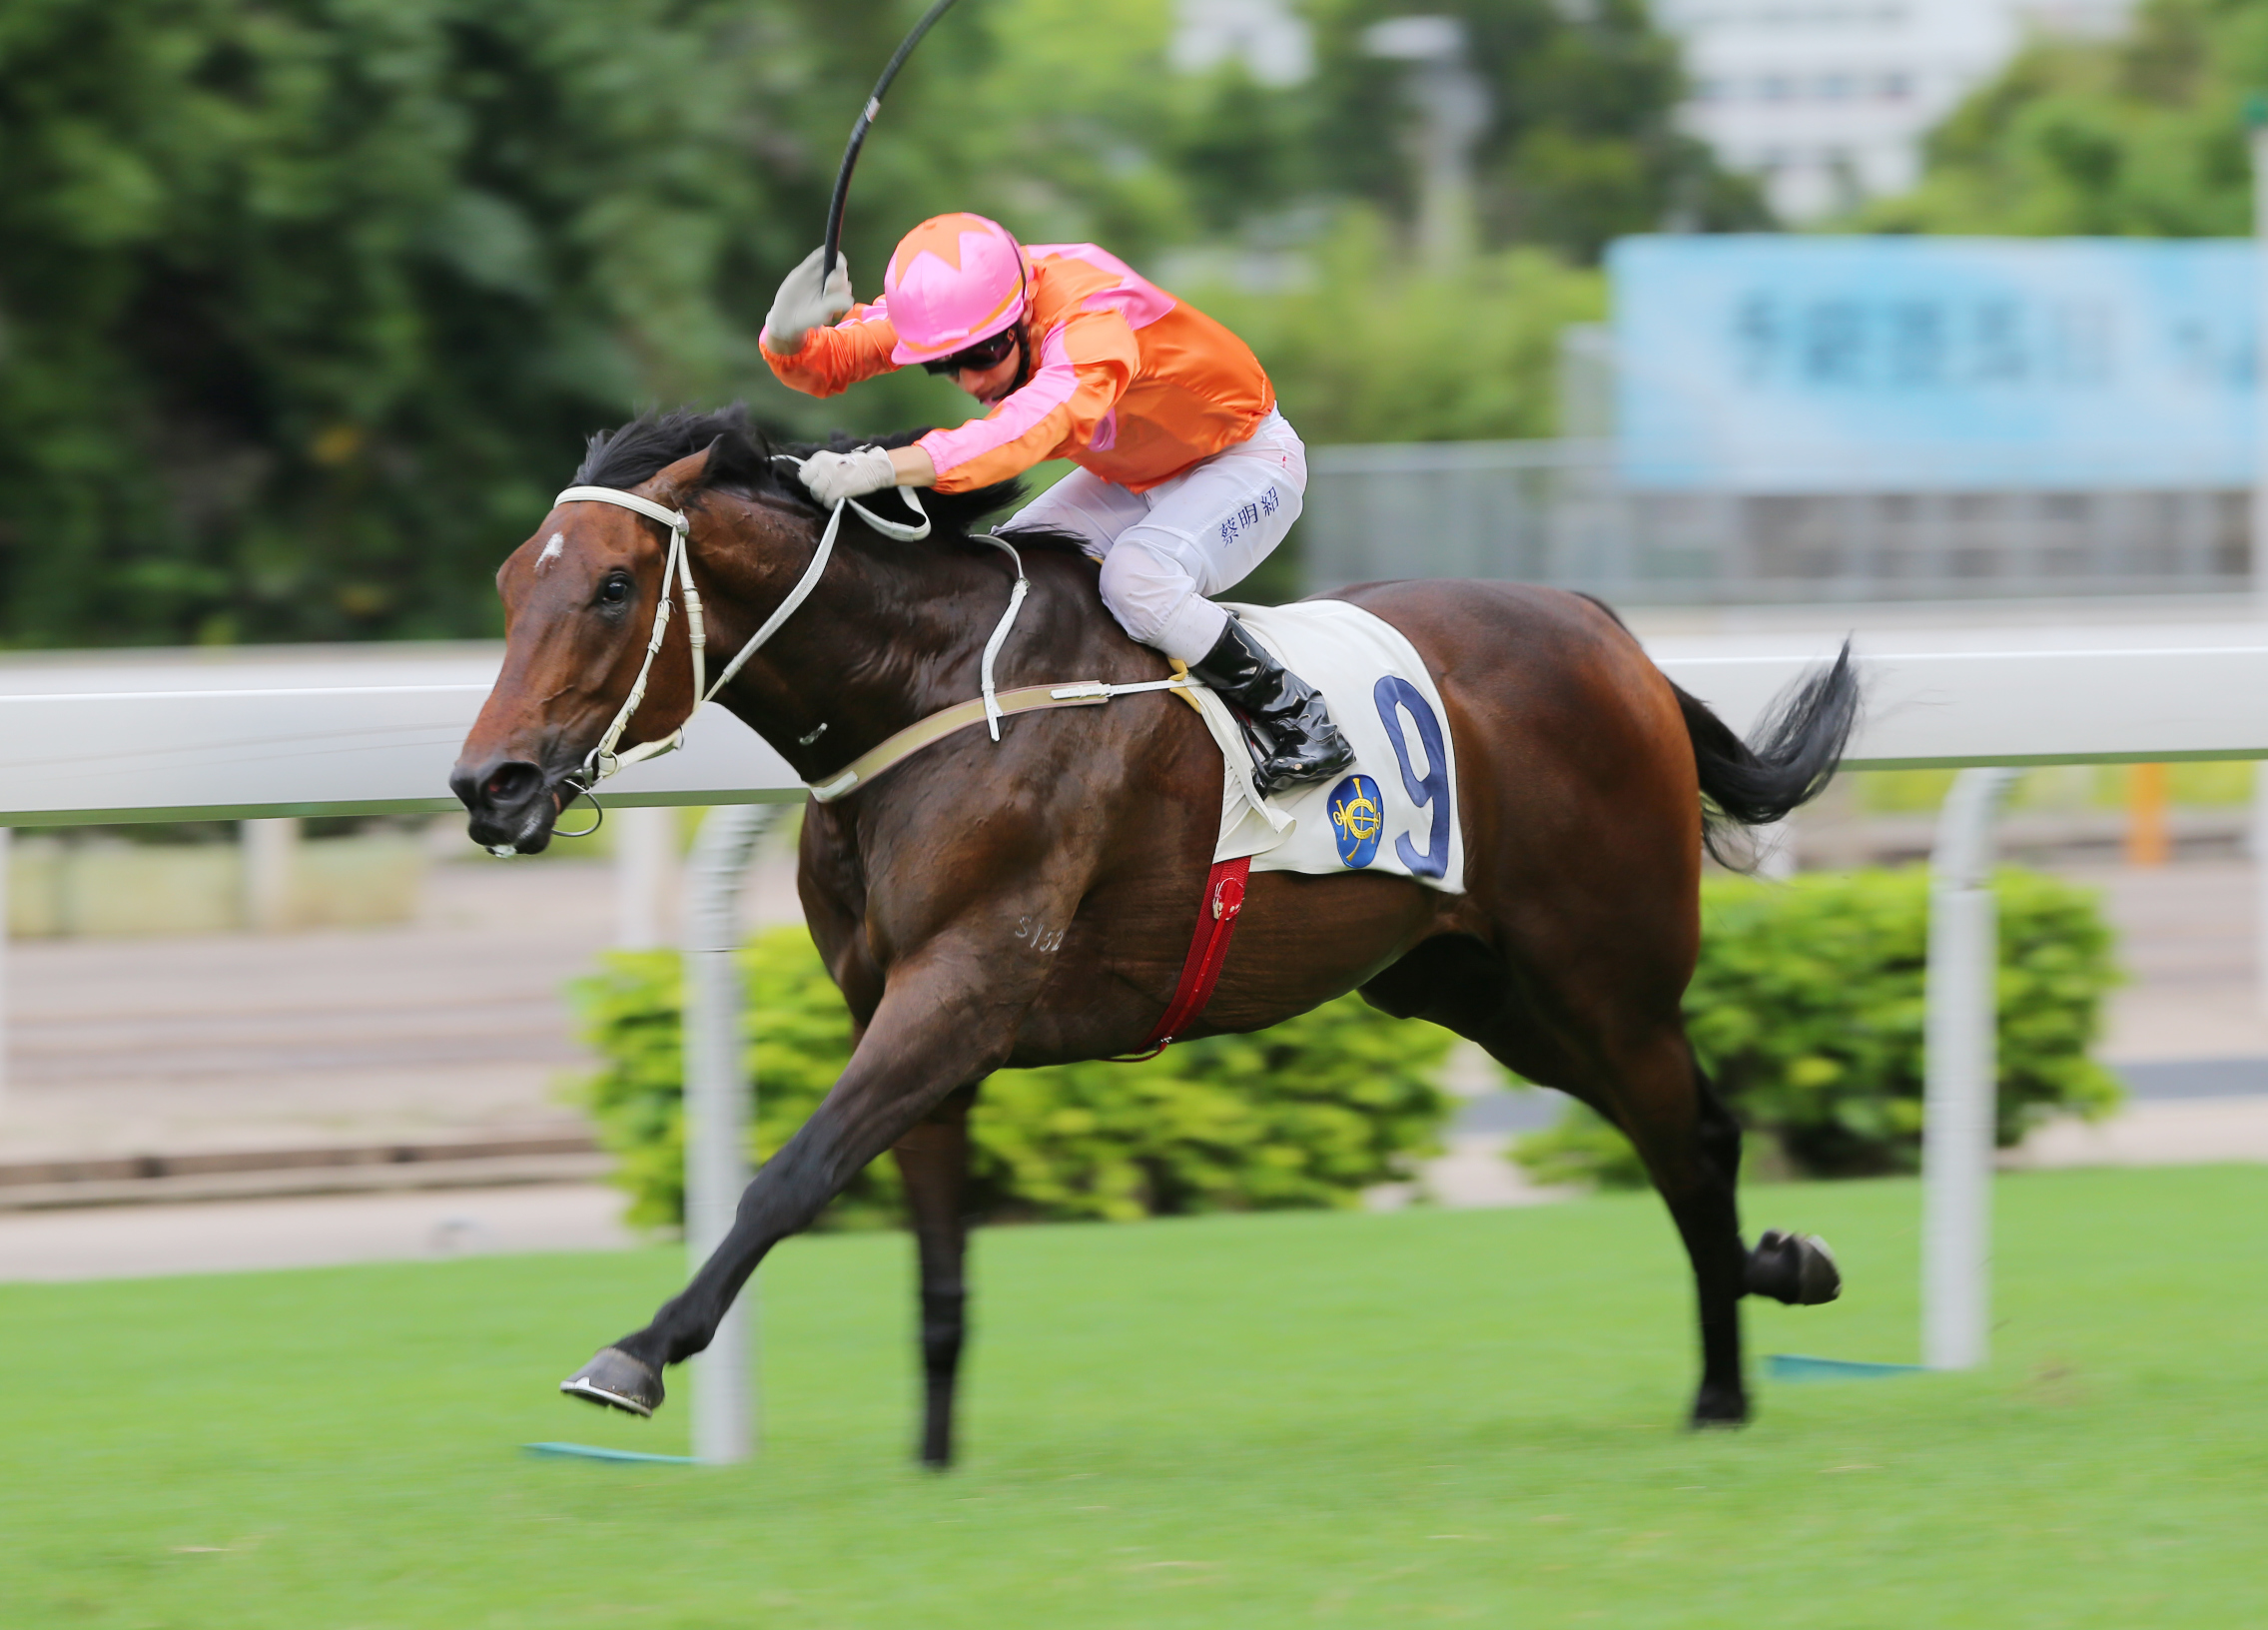 Helene Super Star wins in June. Cruz believes he is "definitely a Group horse and he could even win a Group One". Photo: Kenneth Chan